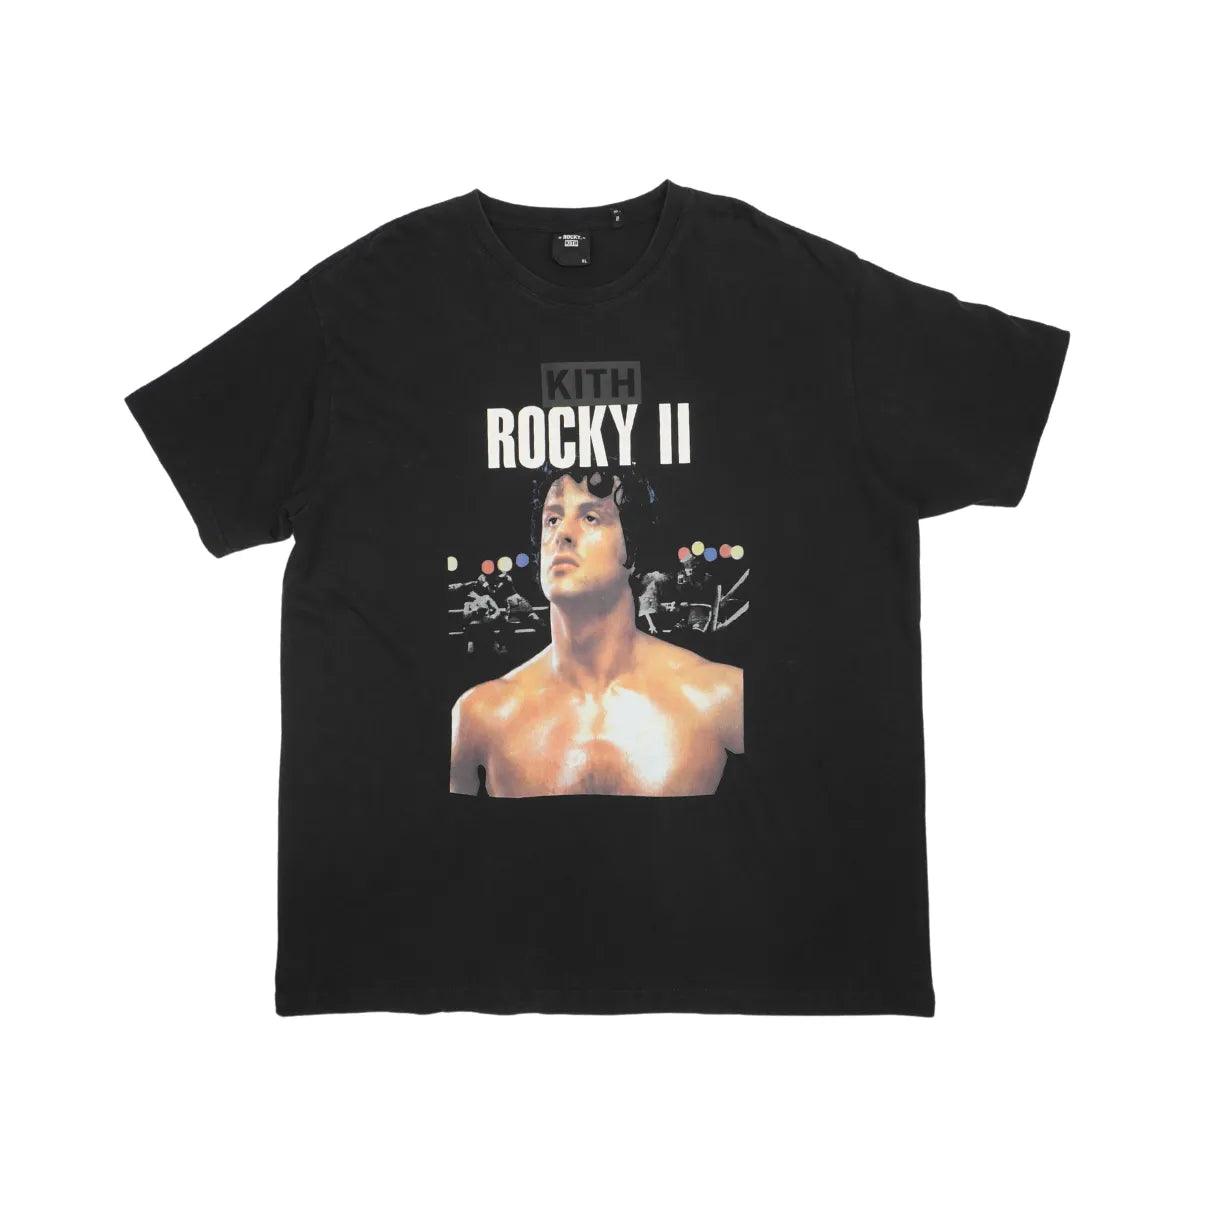 Kith x Rocky Vintage T-Shirt - Men's XL - Fashionably Yours